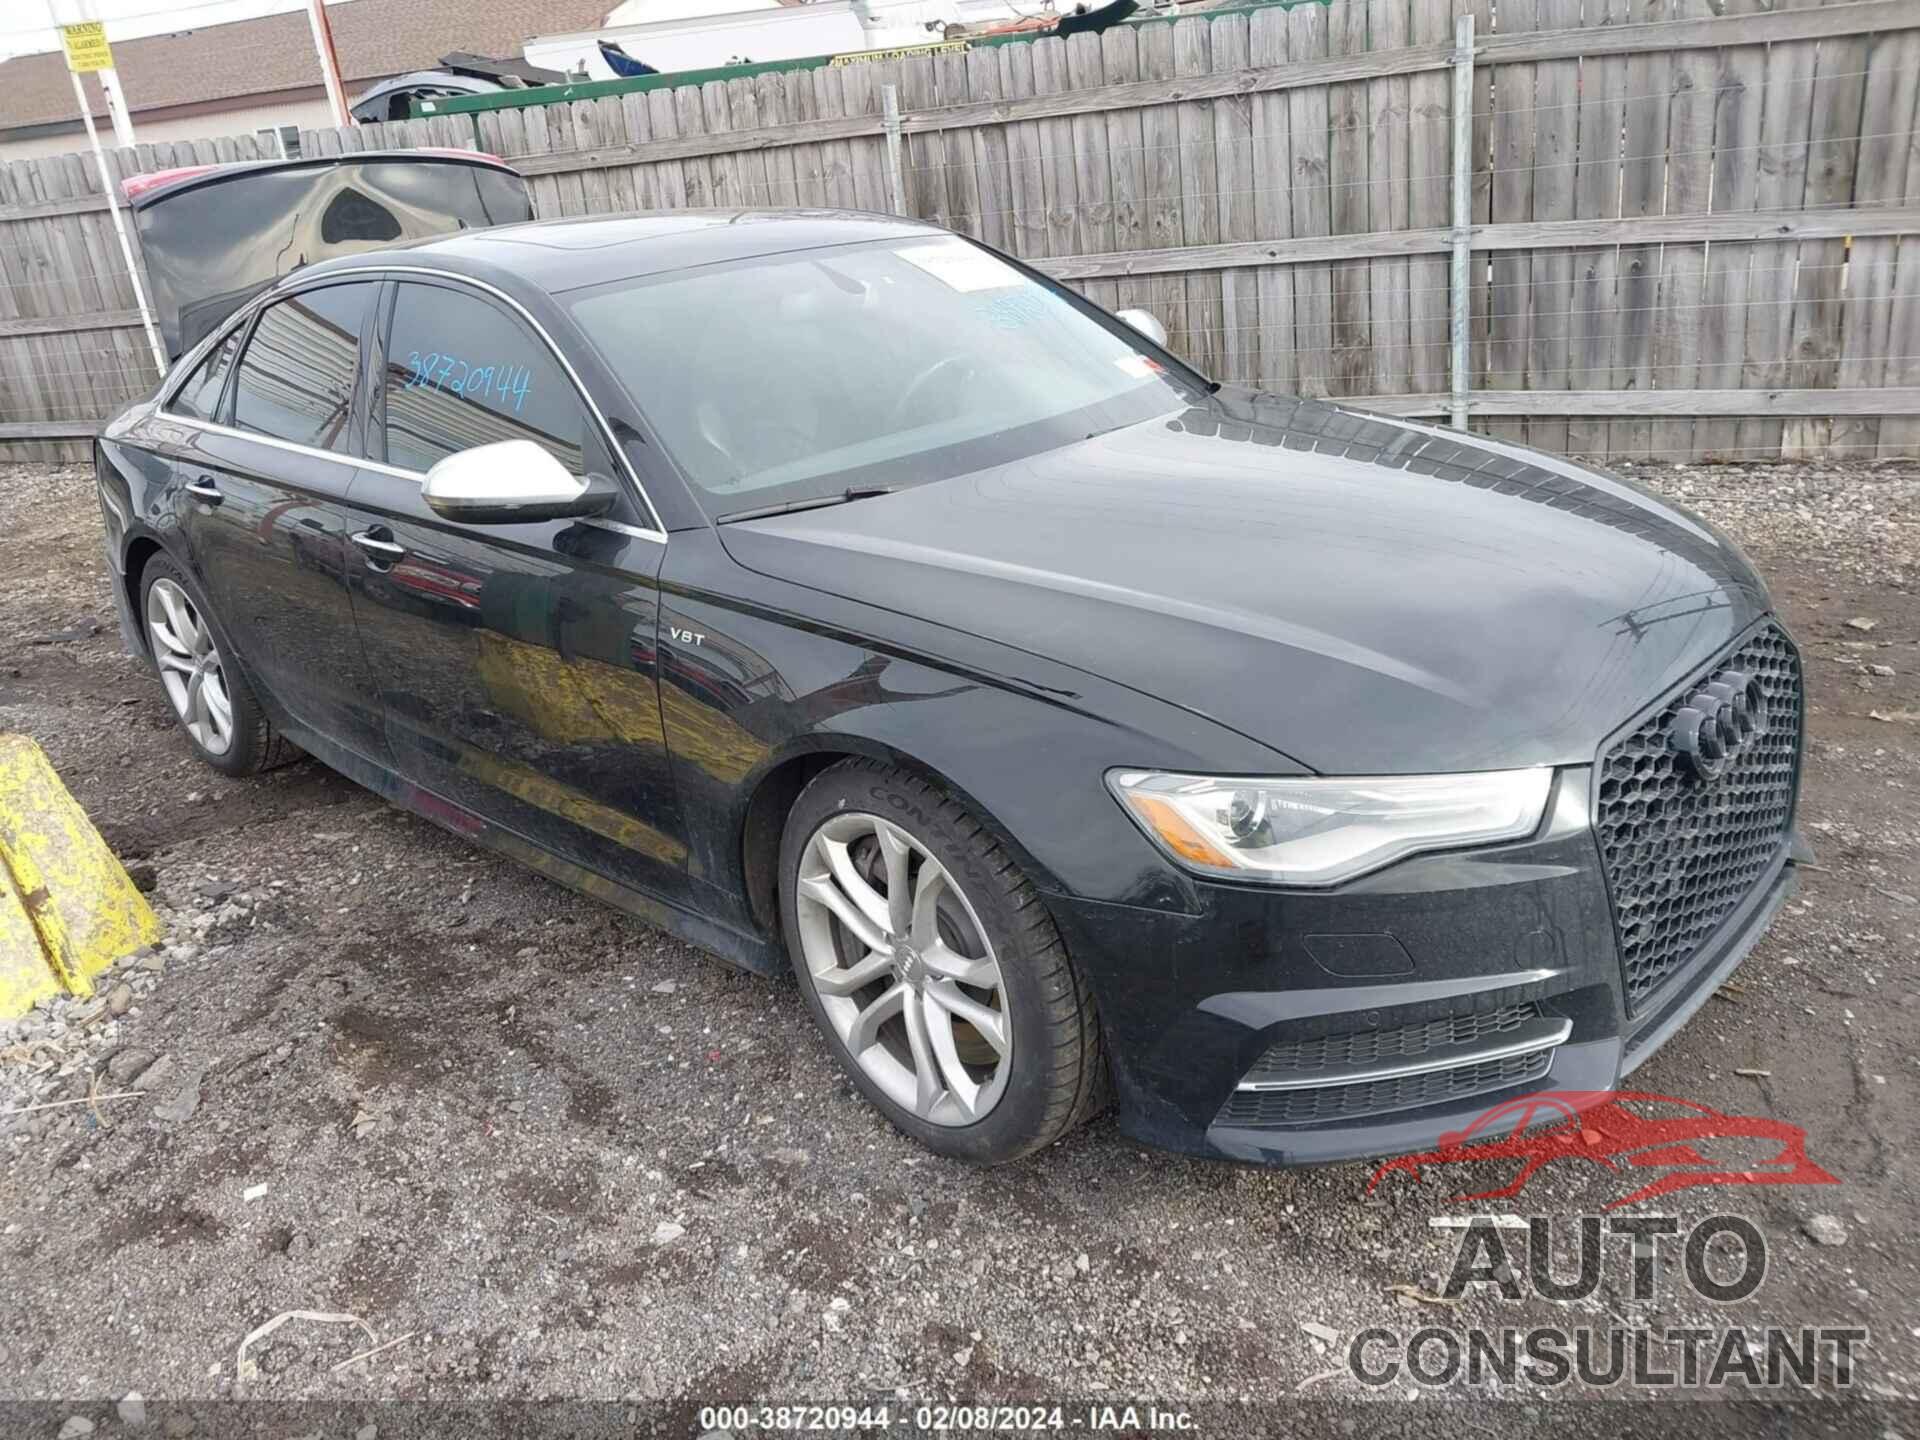 AUDI S6 2016 - WAUF2AFC4GN095572